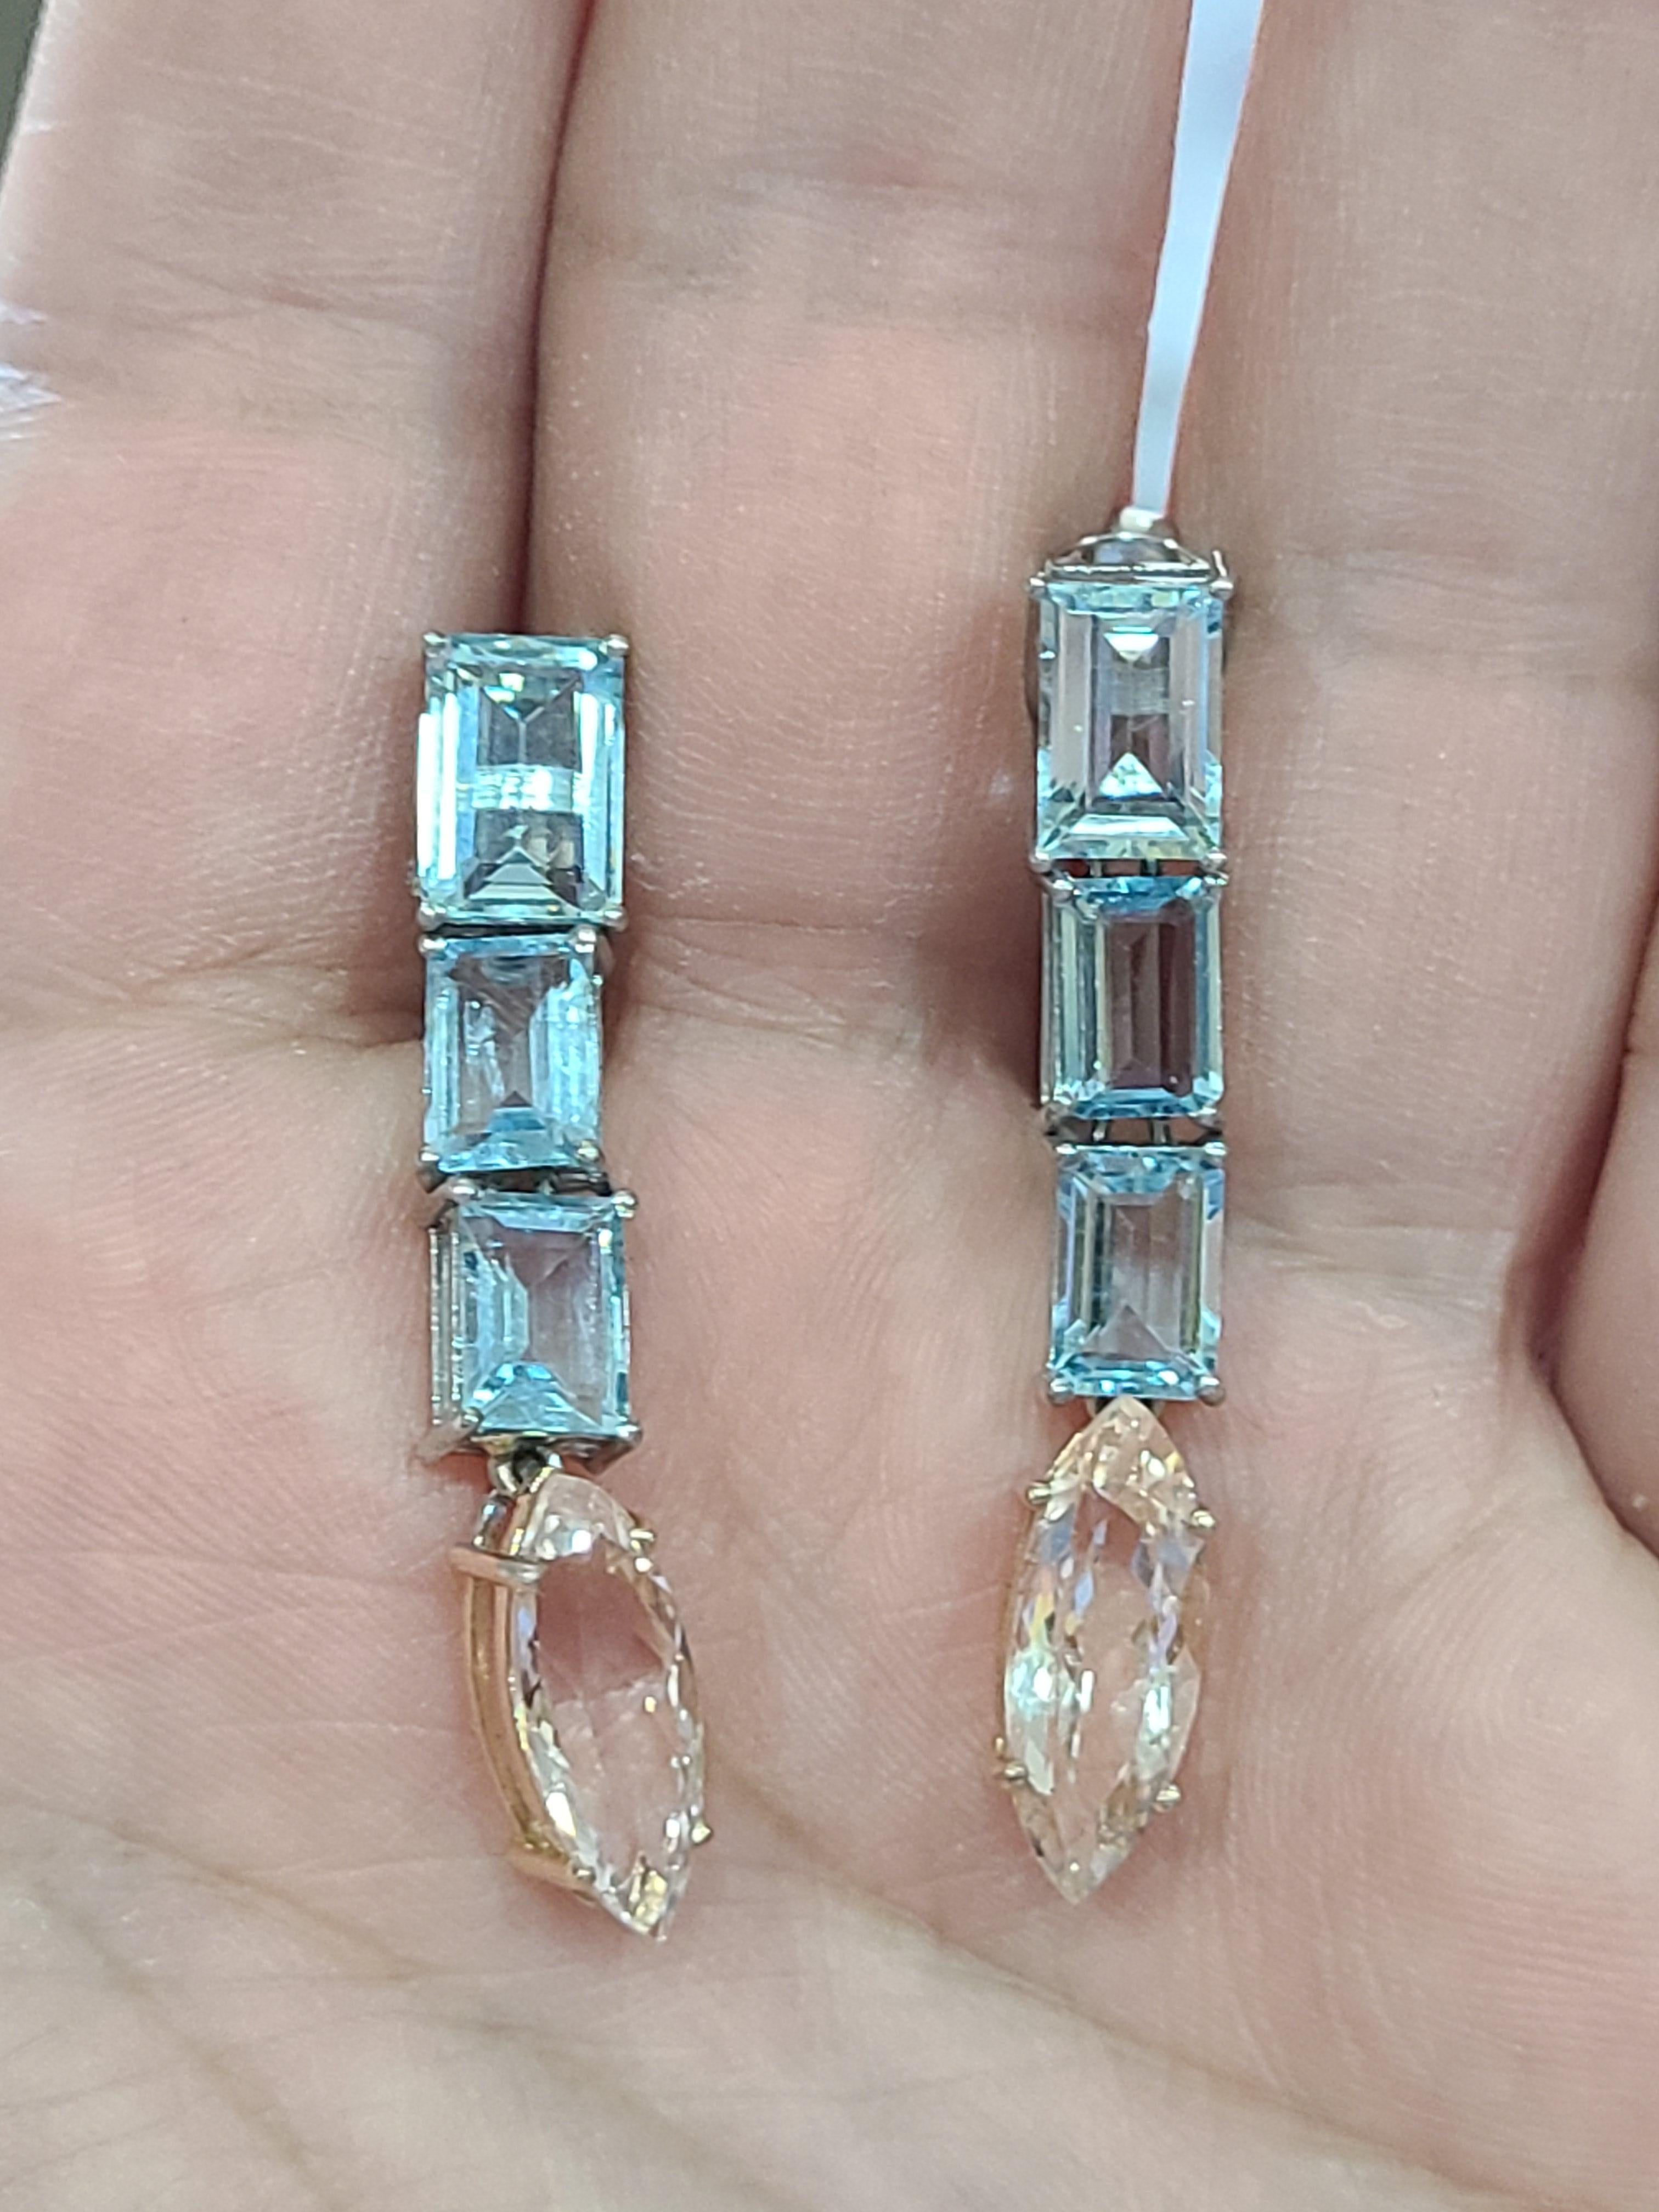 A simple and elegant earrings set in 18k rose gold and white gold with natural morganite and aquamarine. The morganite weight is 4.95 carats and aquamarine weight is 6.55 carats. The net gold weight is 5.56 grams and earring dimension in cm 4 x .6 x